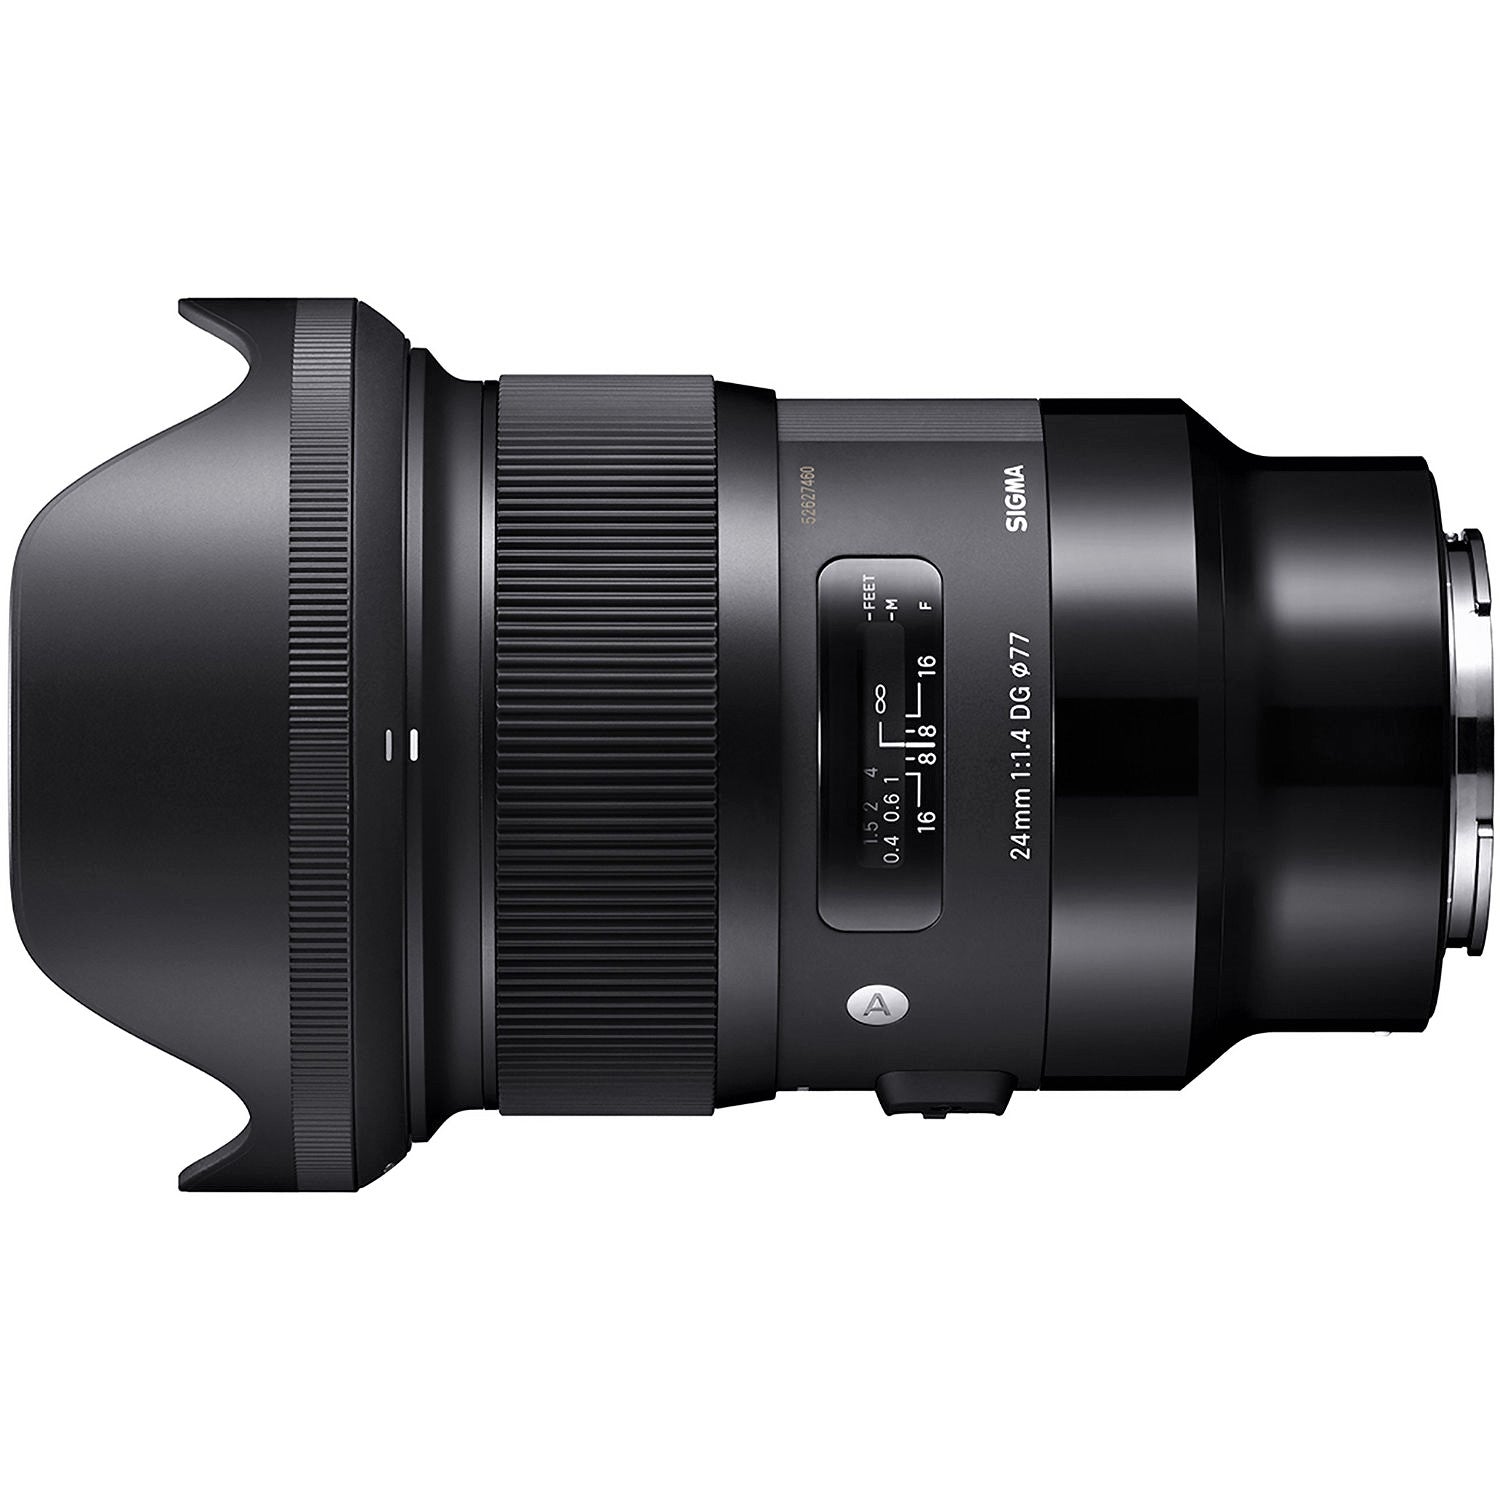 Sigma 24mm F1.4 DG HSM Art Lens for Sony E with Attached Lens Hood on the Left Side